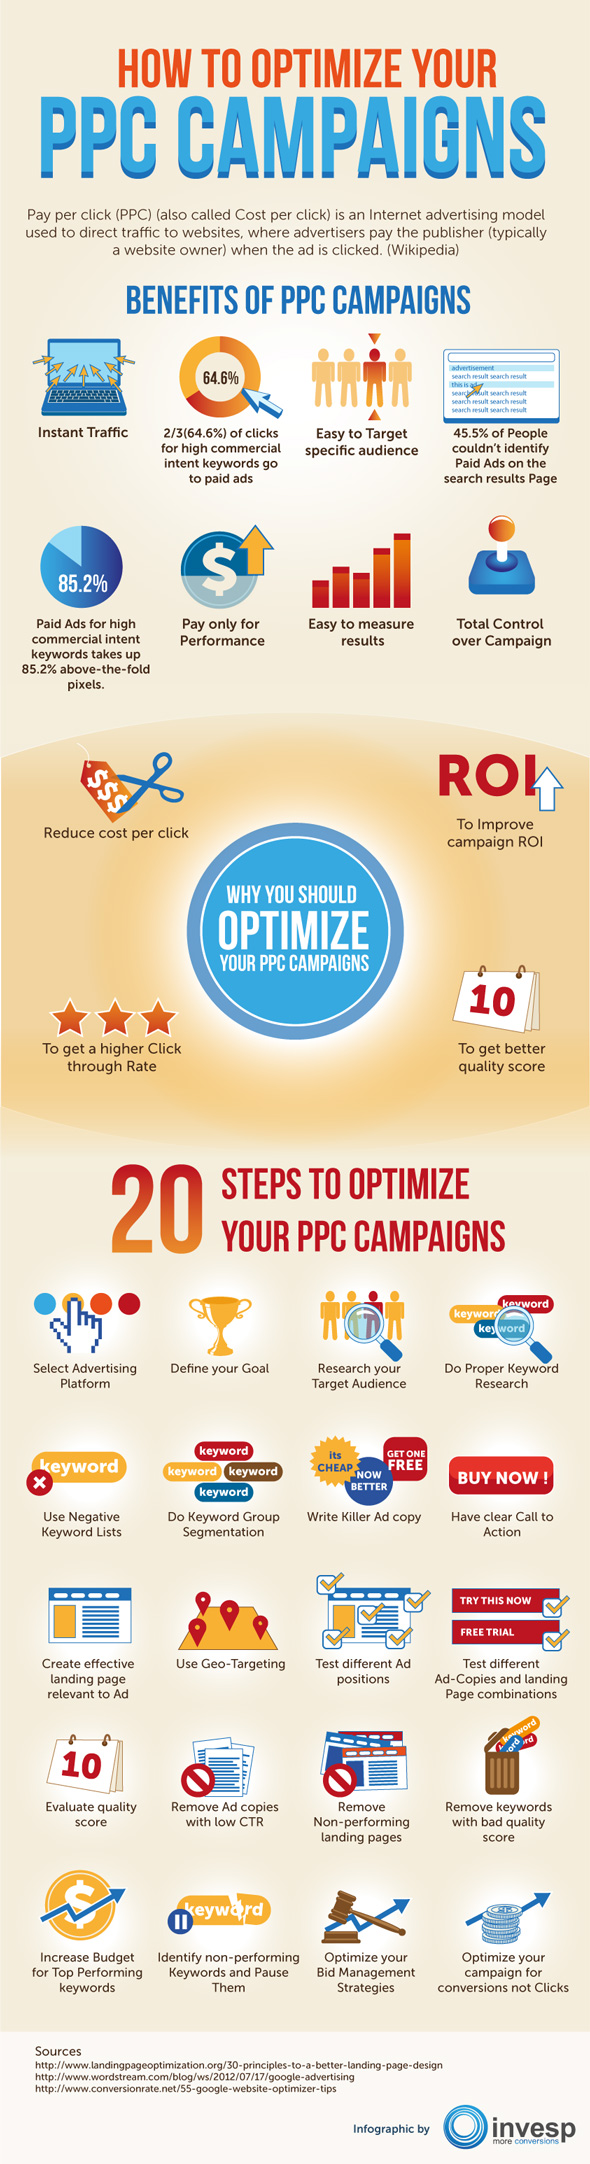 How to Optimize your PPC Campaigns